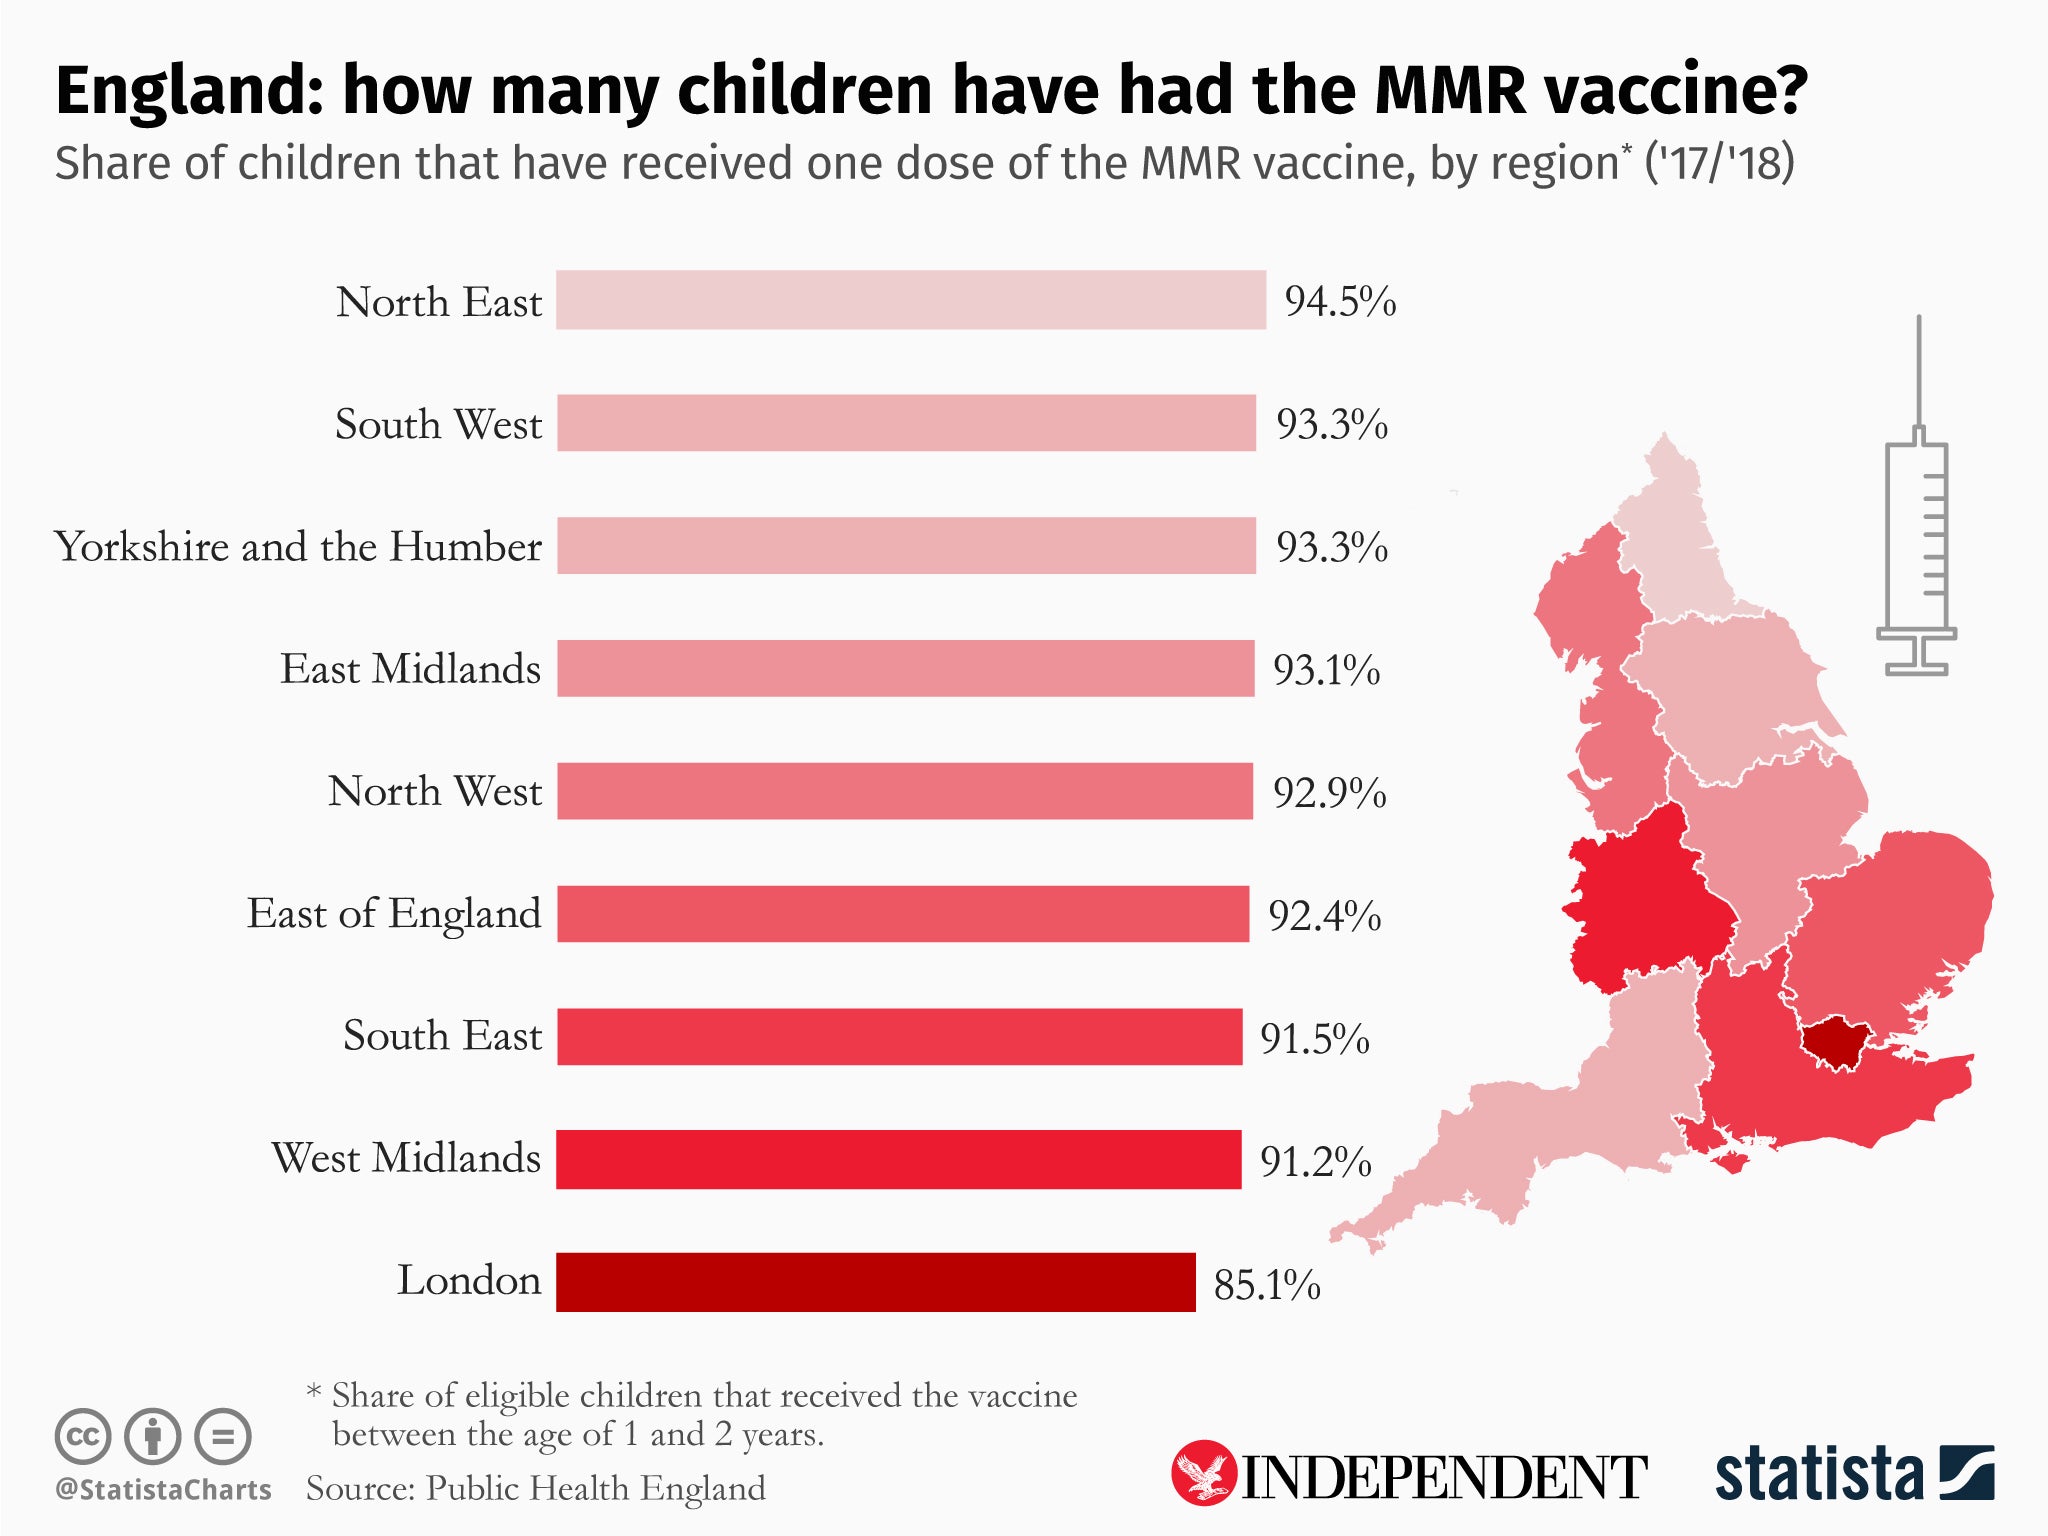 Chart by Statista showing how many children have had the MMR vaccine by region in England.